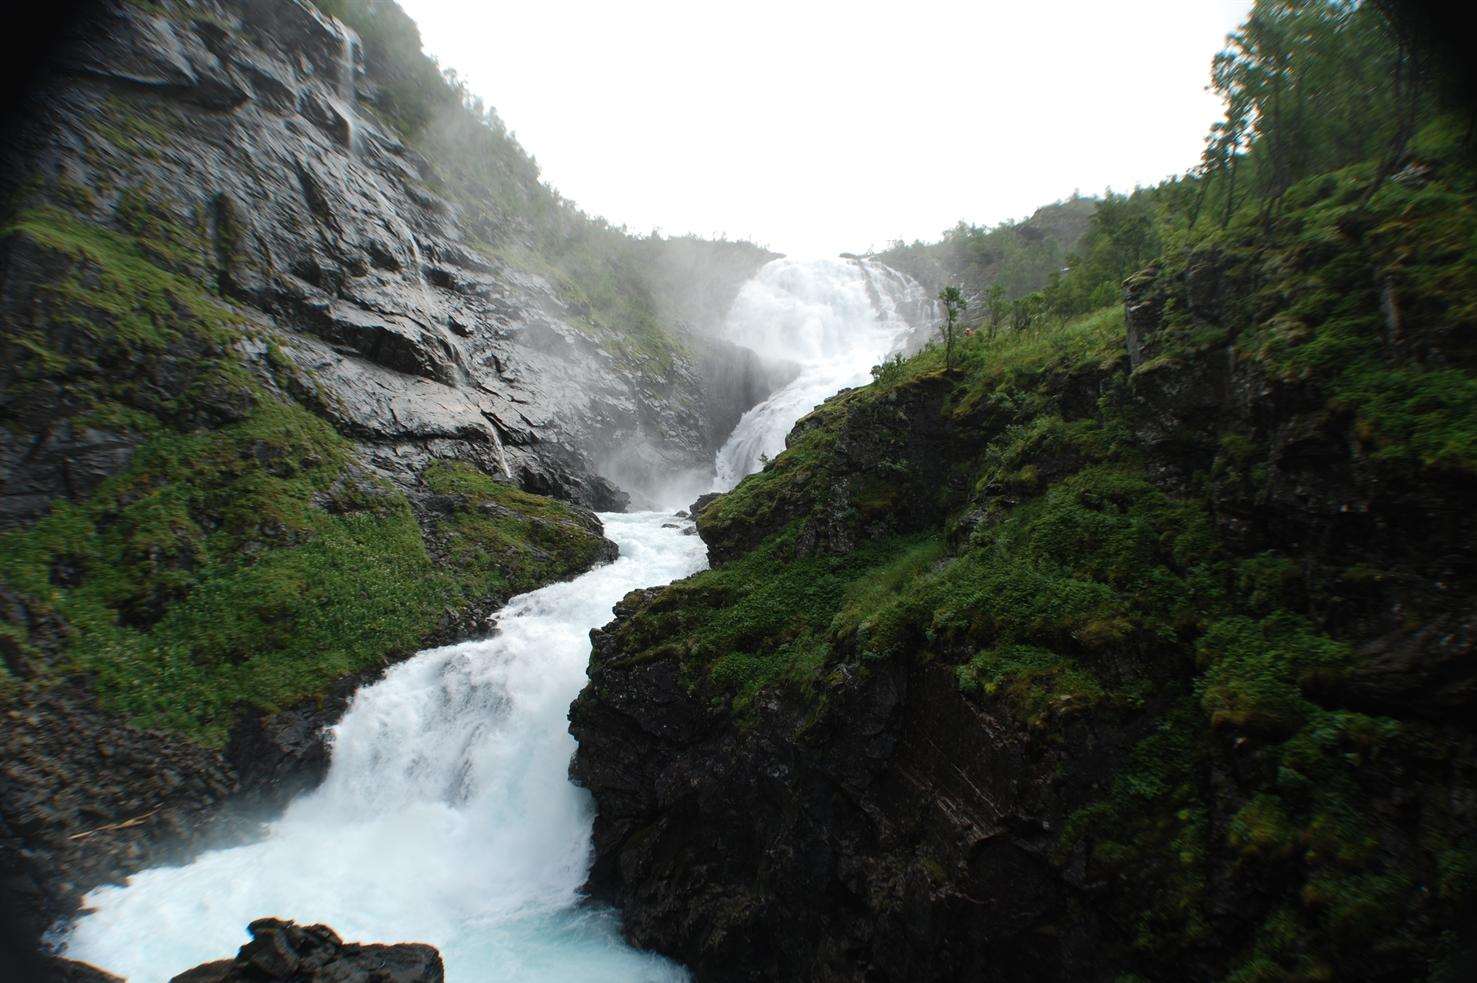 The Kjosfossen Waterfall can be seen from the Flam railway